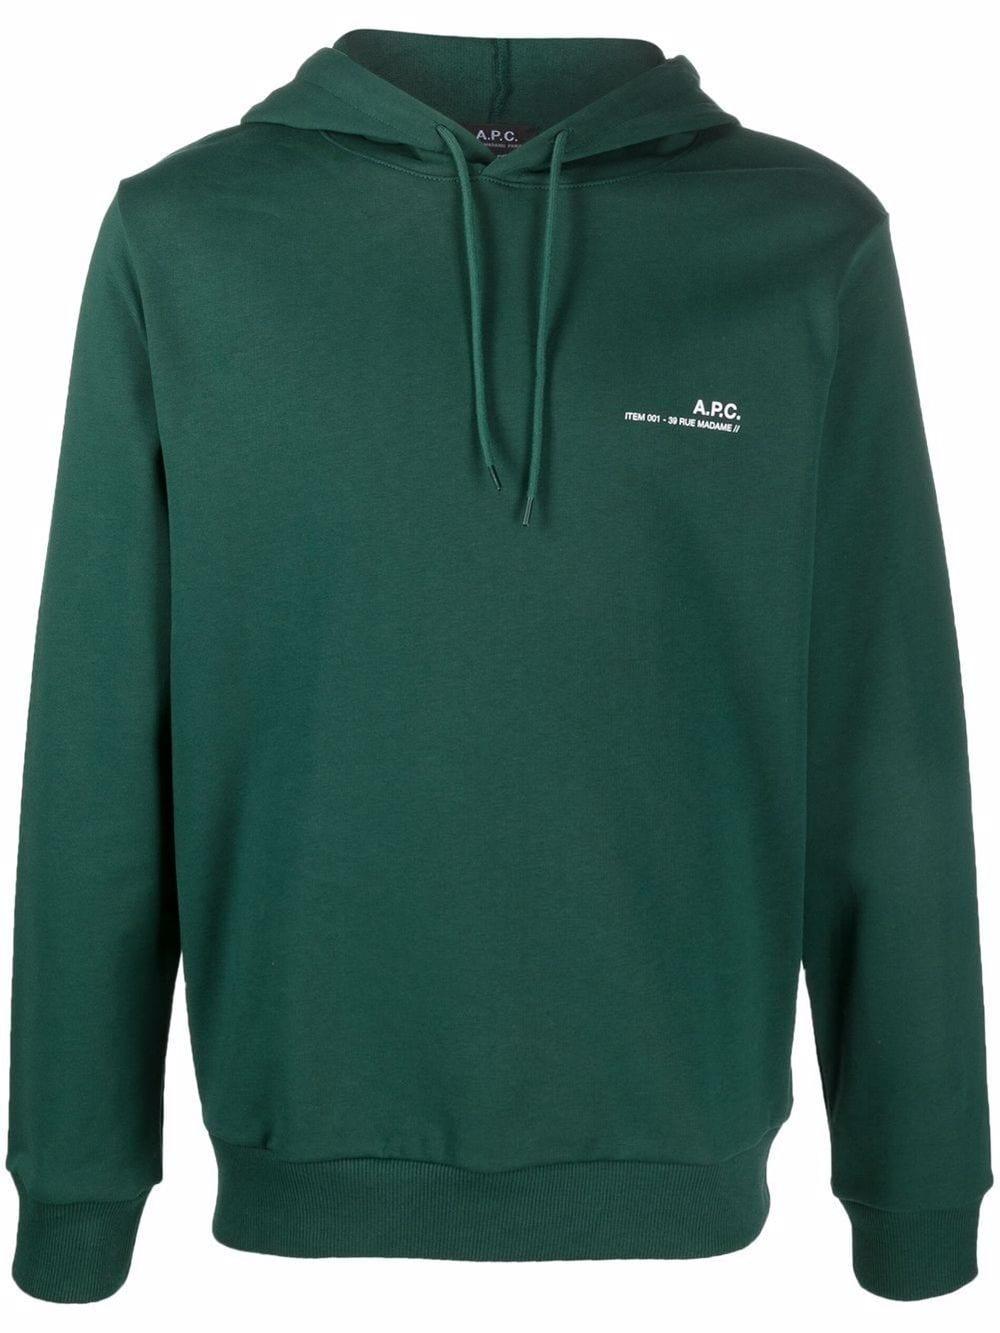 A.P.C. Cotton Logo Print Hoodie in Green for Men - Save 11% - Lyst